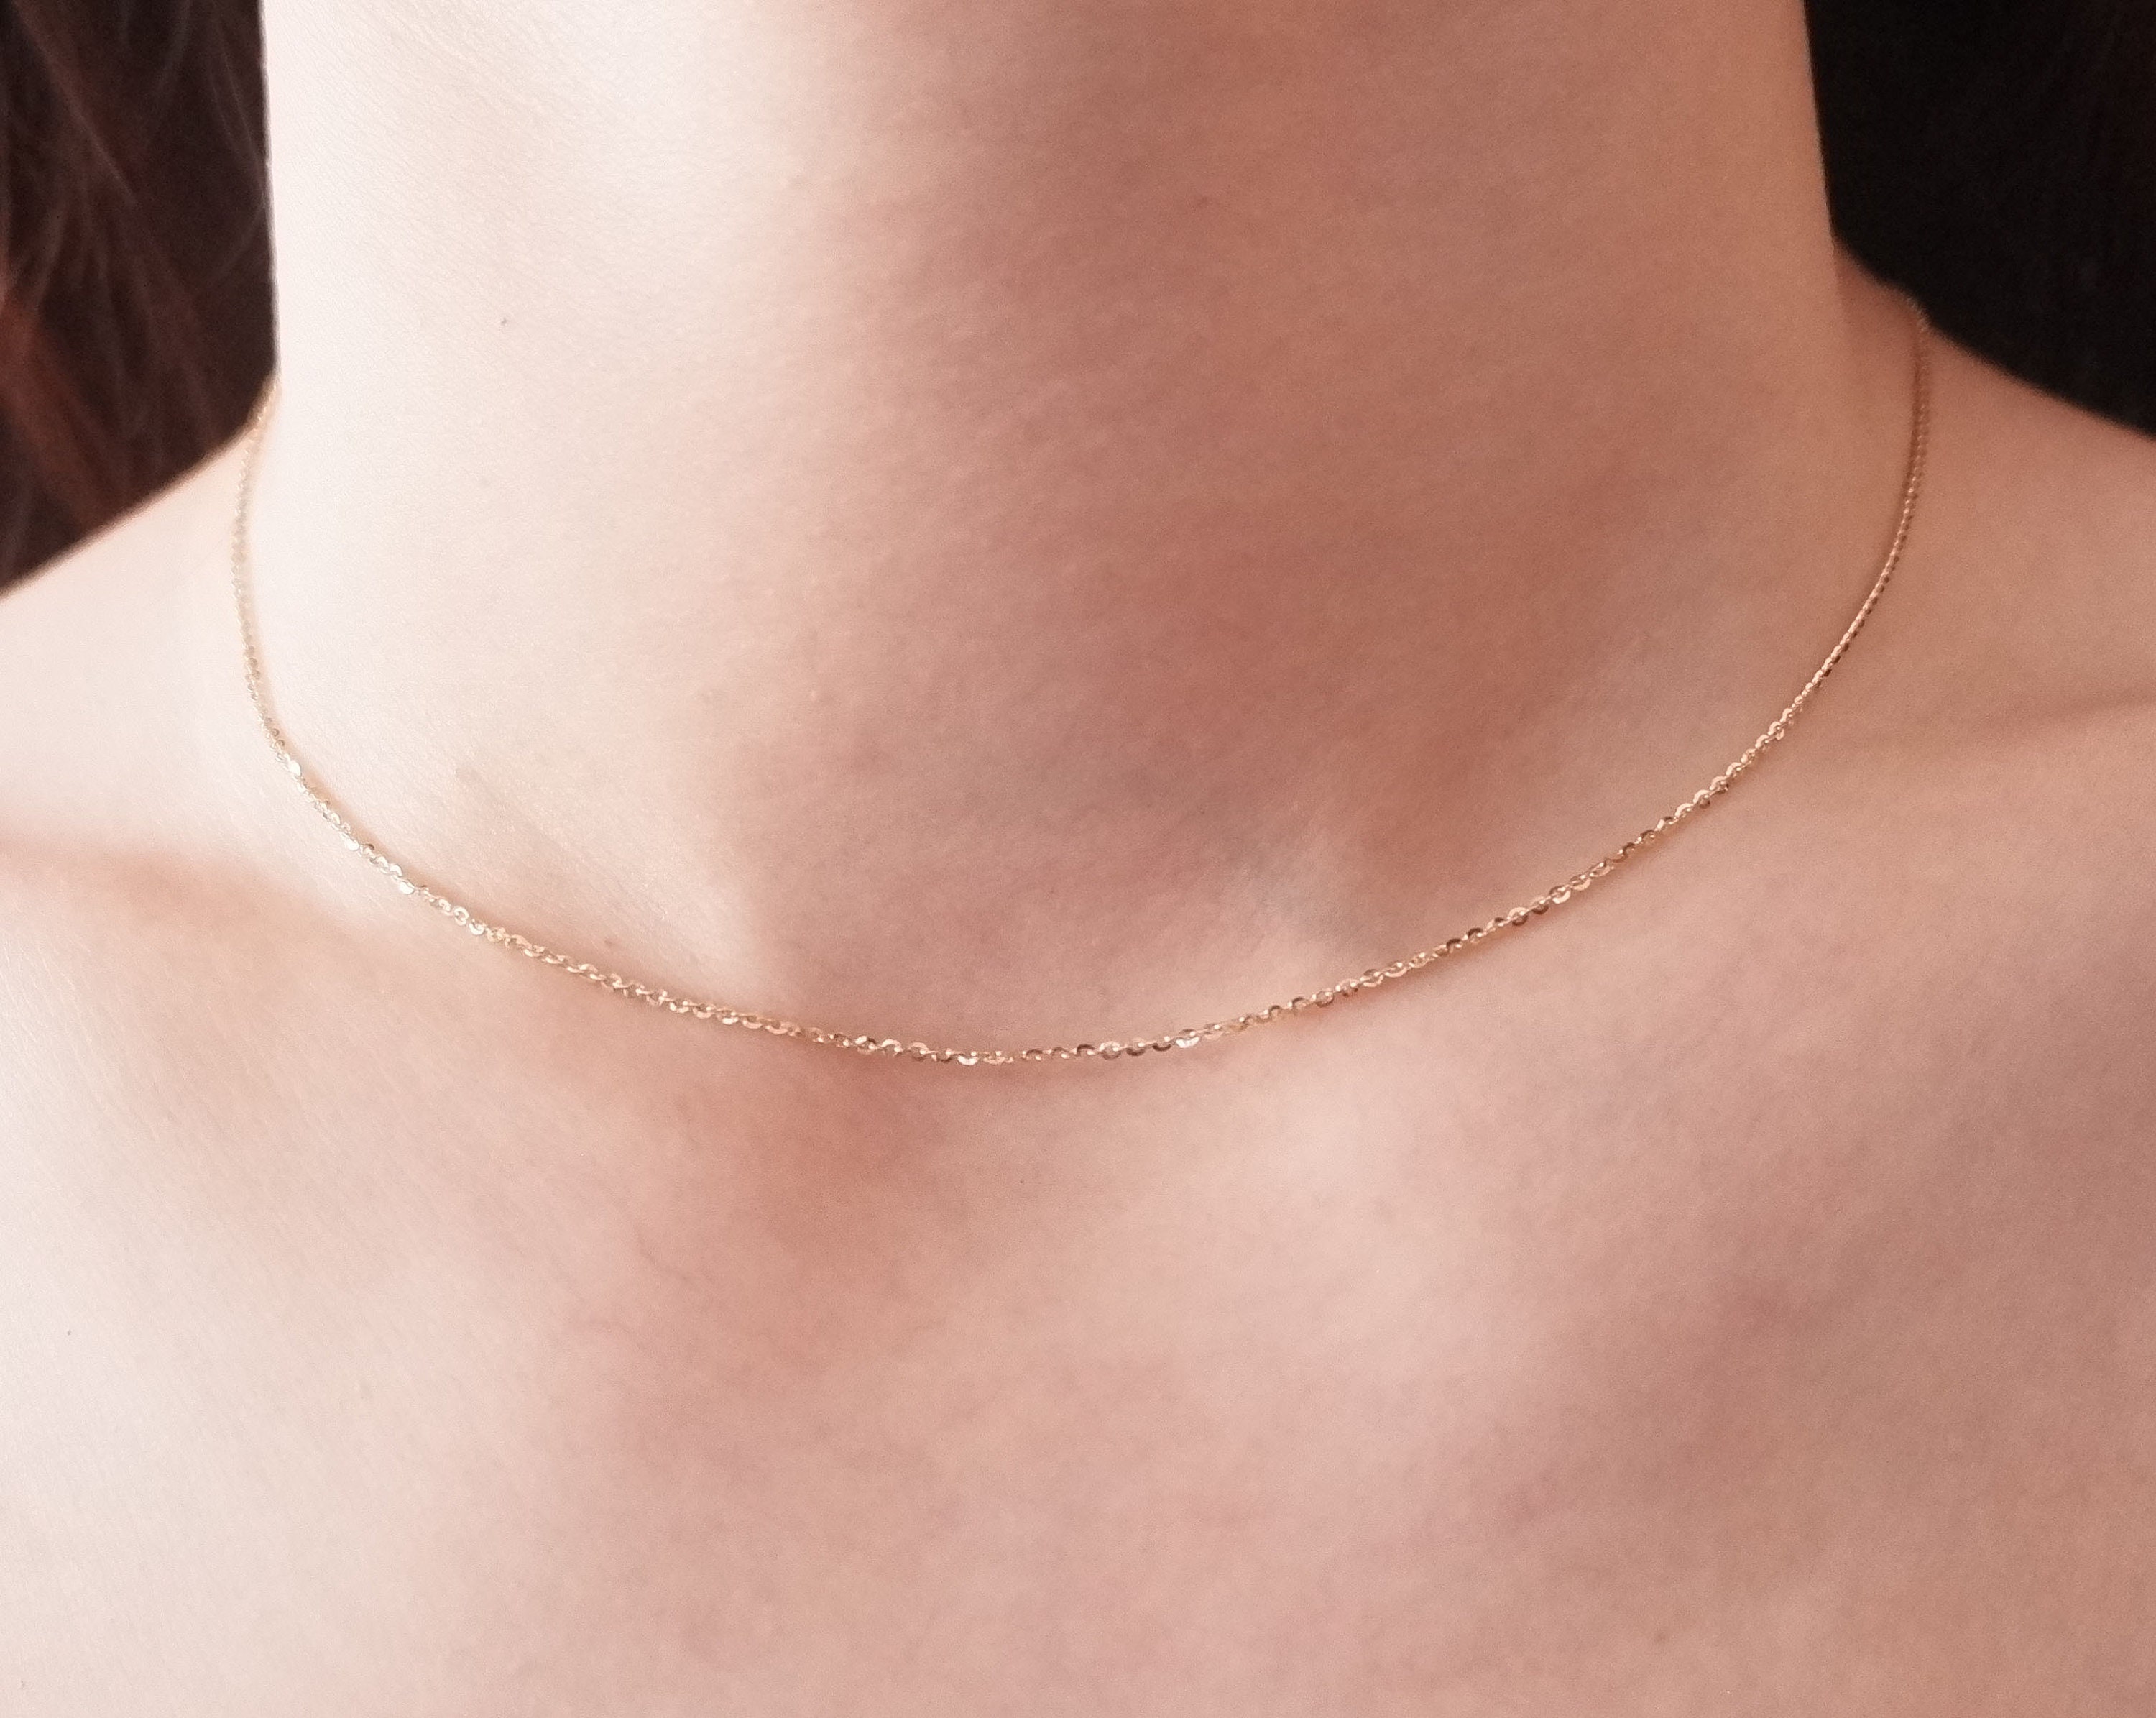 Necklace made of white 9K gold - round glossy brilliant in a mount, thin  chain